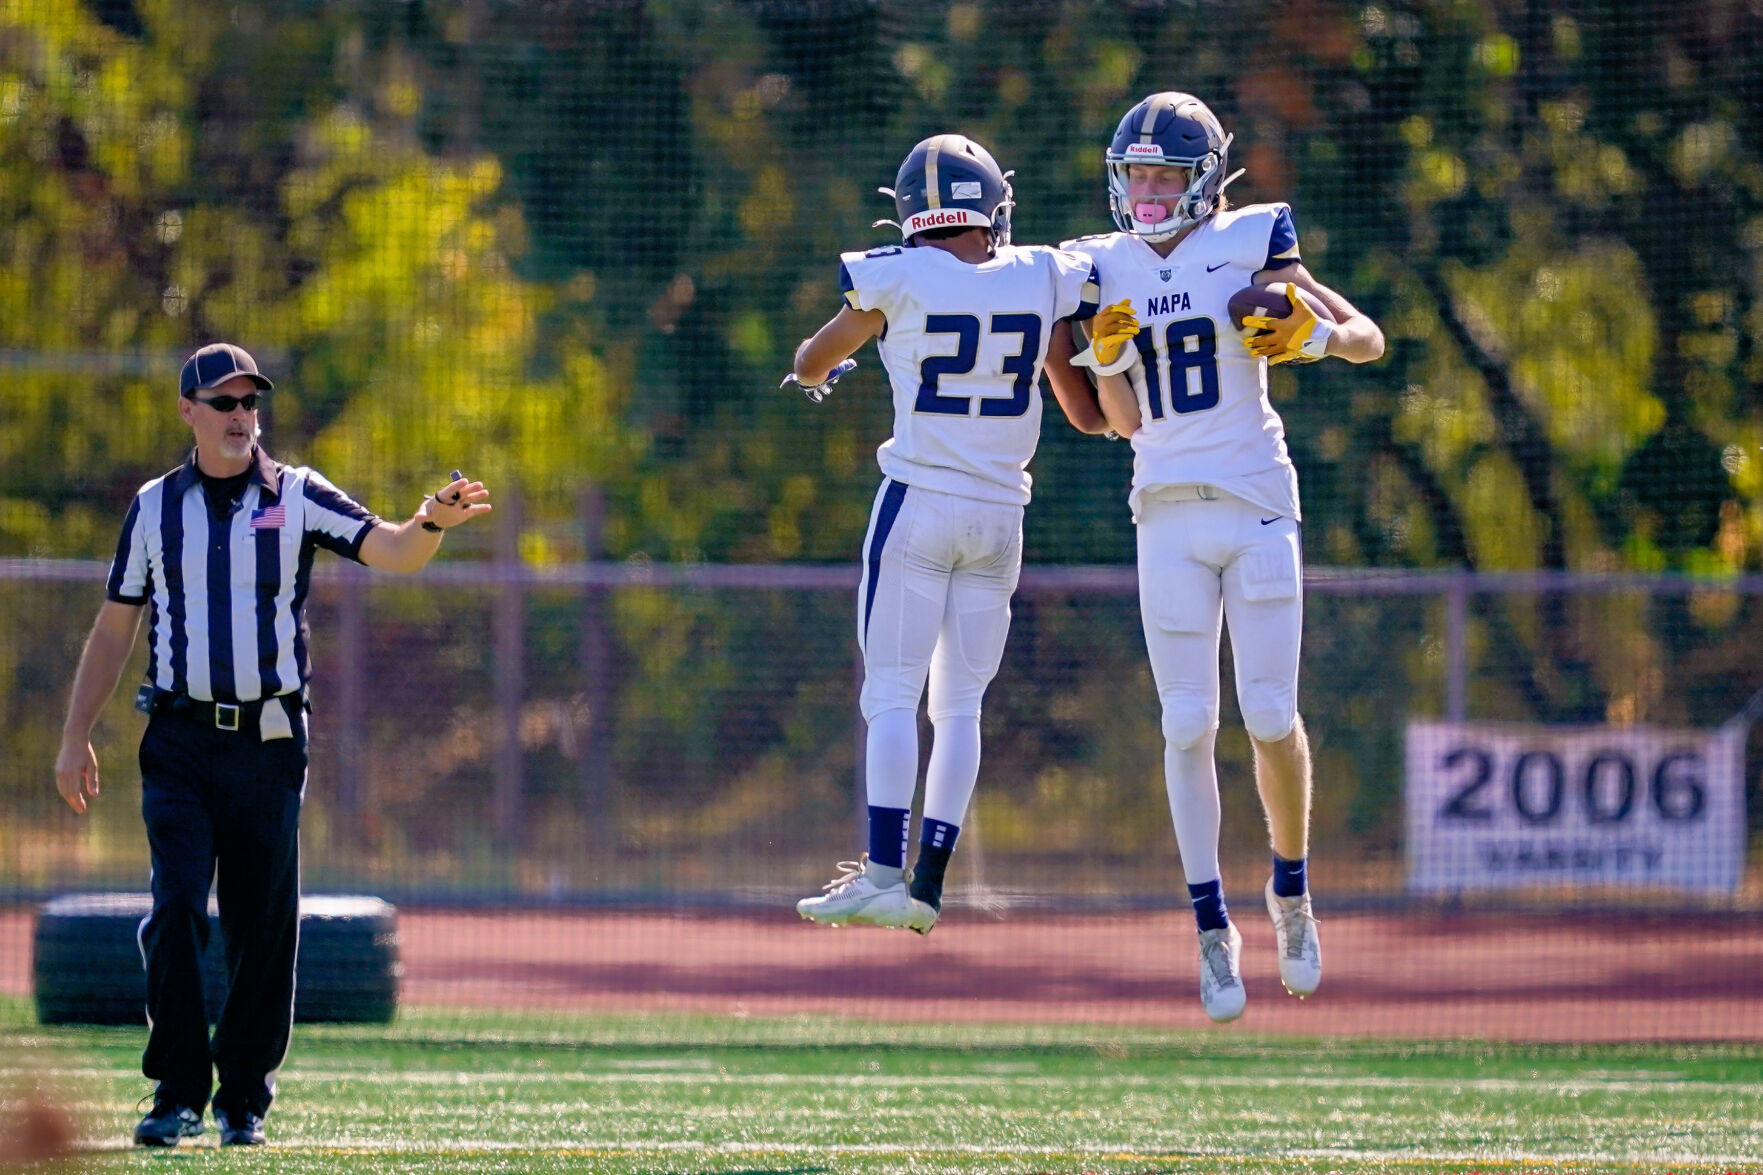 Napa High School Football Team Undefeated in Preseason with 45-6 Win over Novato High